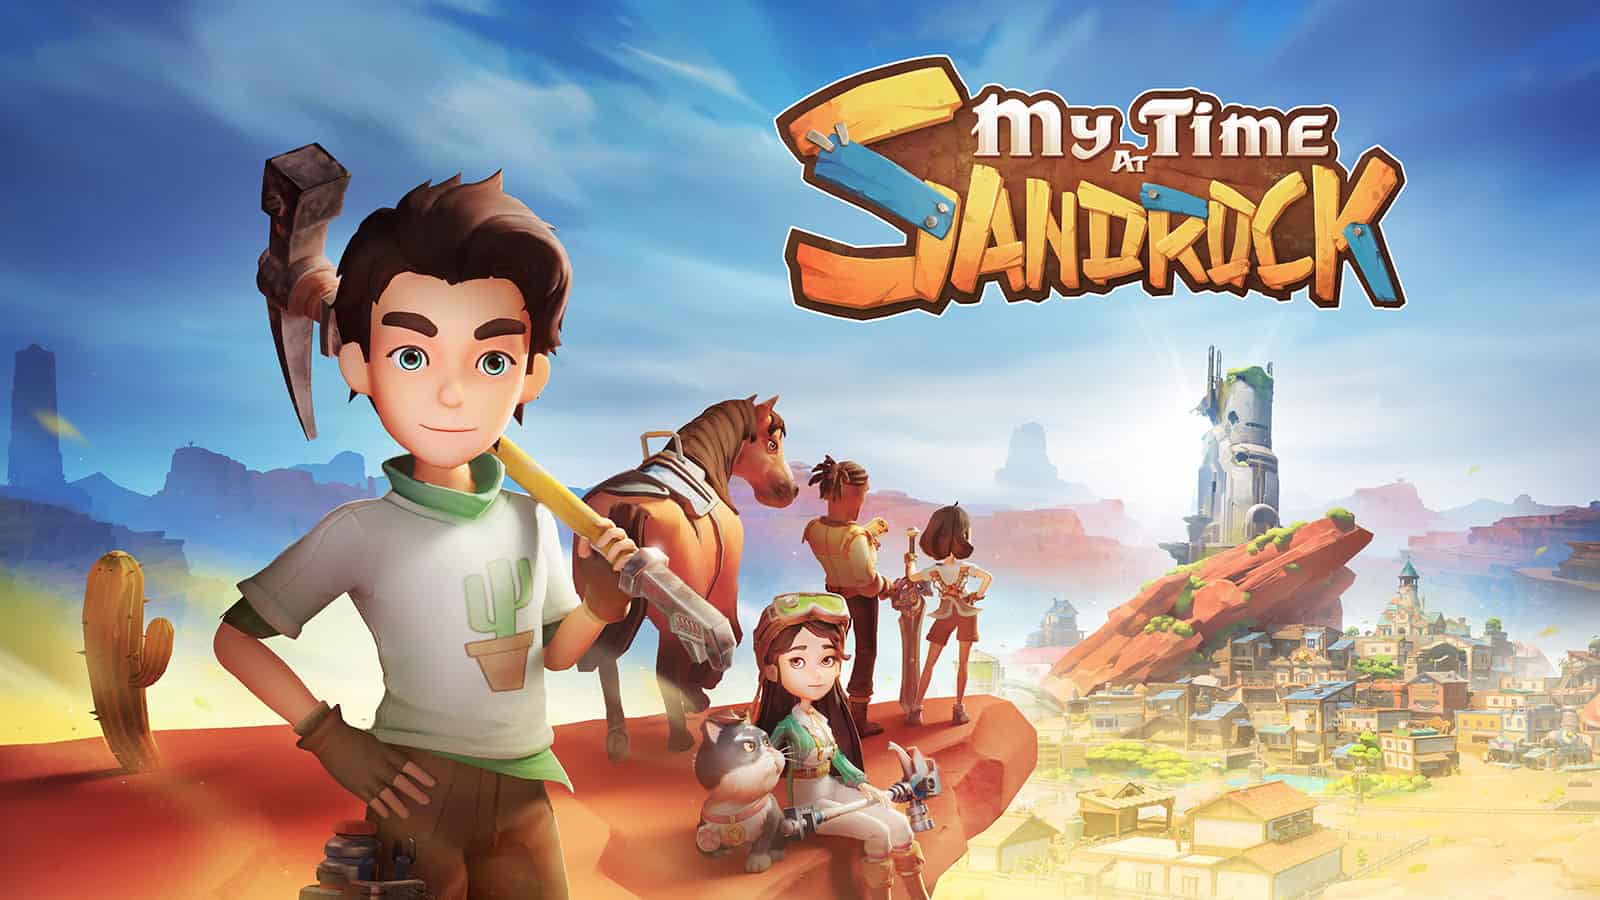 Major Content Update For My Time At Sandrock On Switch Adds Babies, Bug Fixes, And More